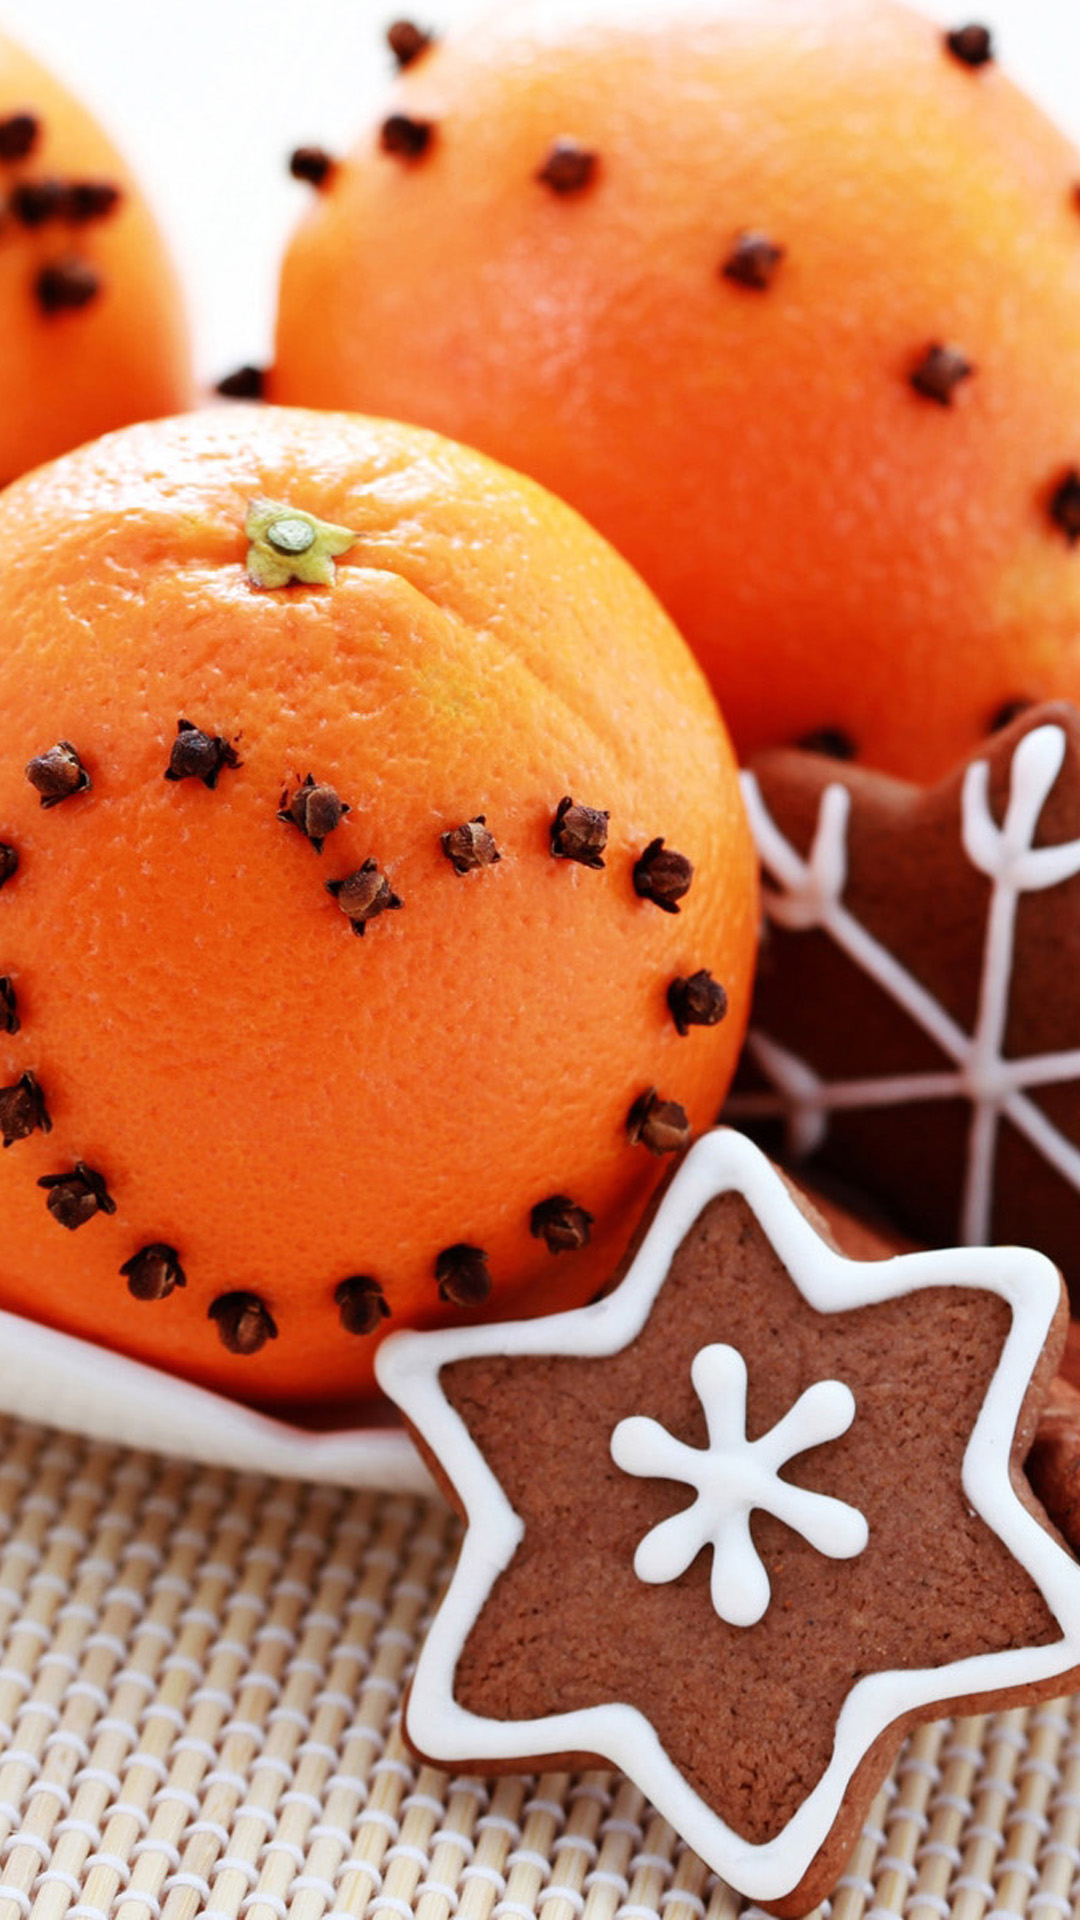 Oranges Gingerbread Christmas Food Android Wallpaper free download